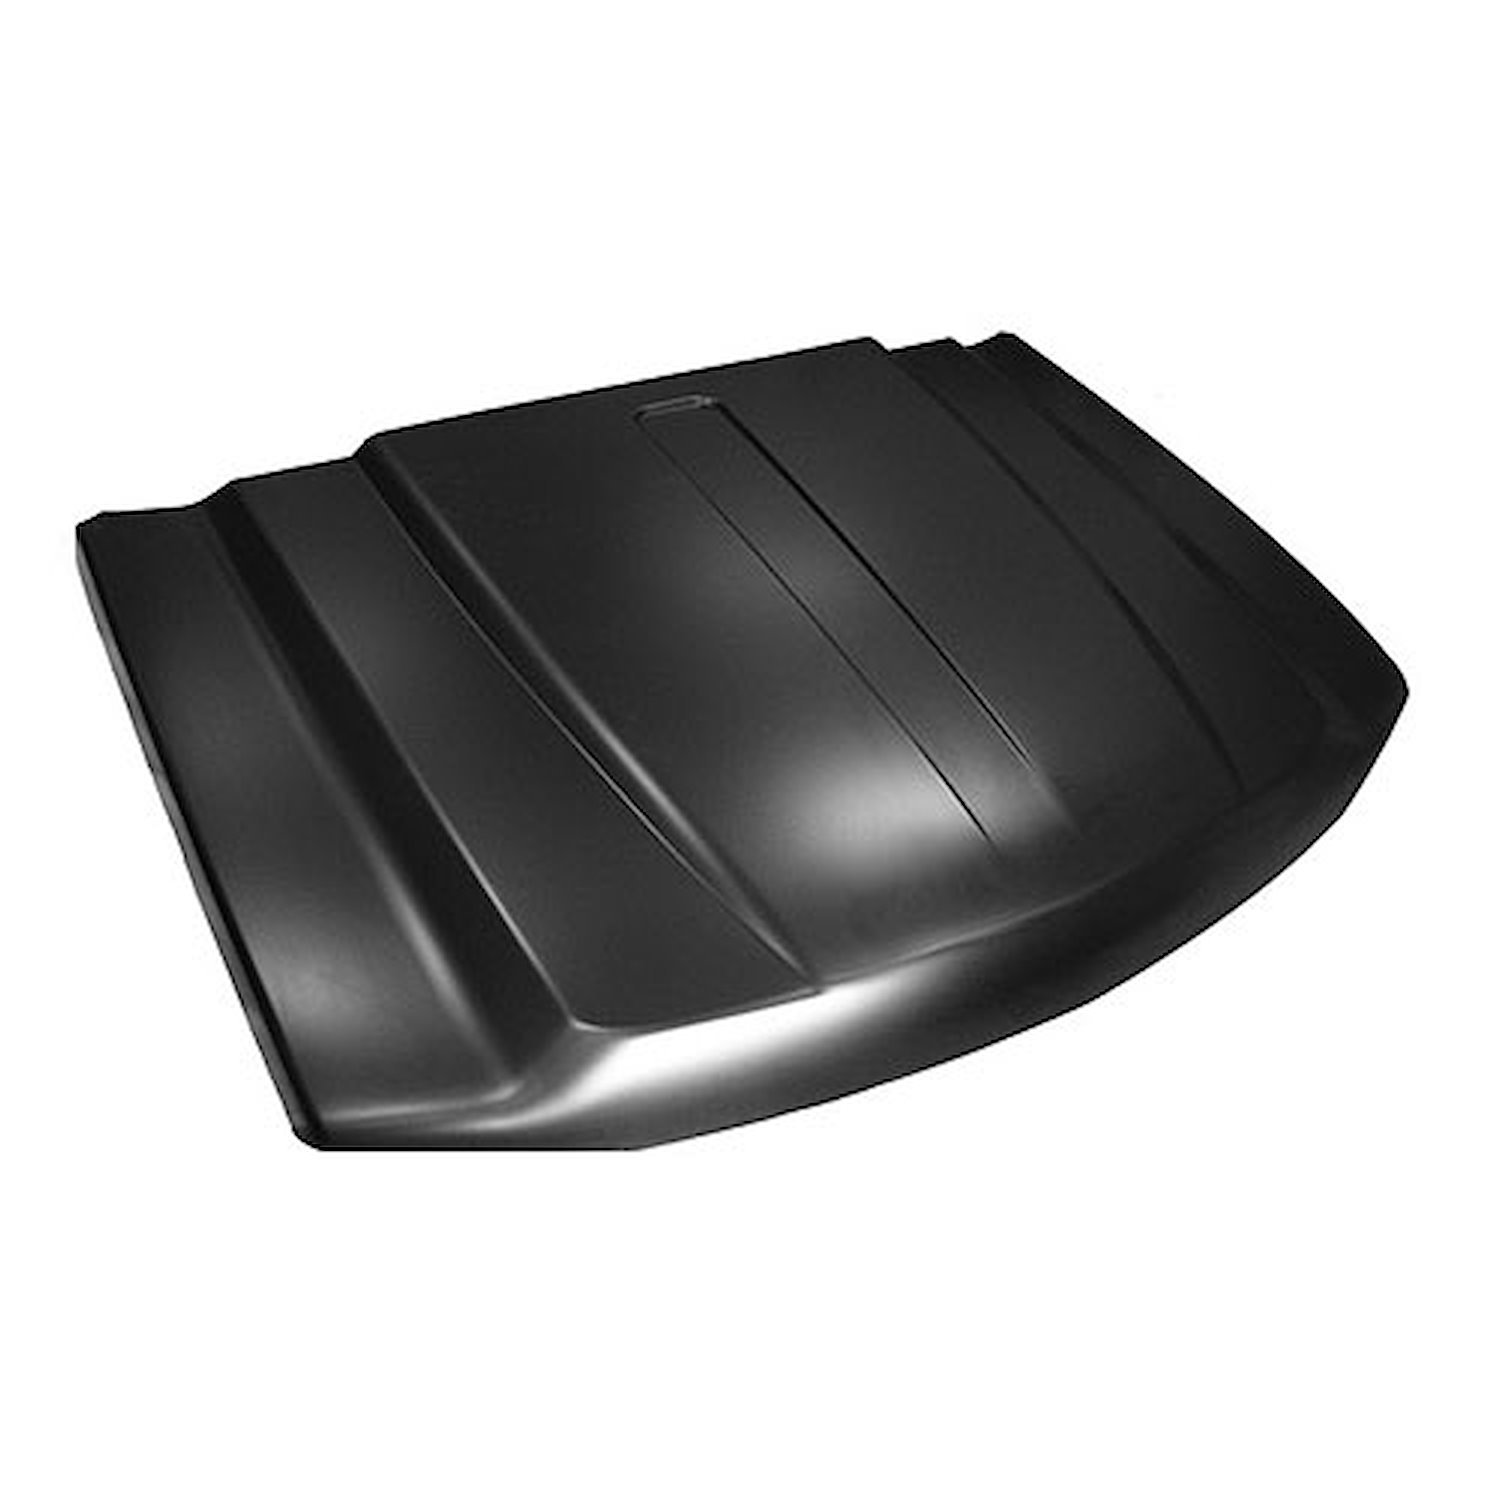 0856-044 Cowl Induction Hood for 2006-2007 Chevy Silverado 1500, 2005-2007 Chevy 2500/3500 HD Trucks [2 in.]